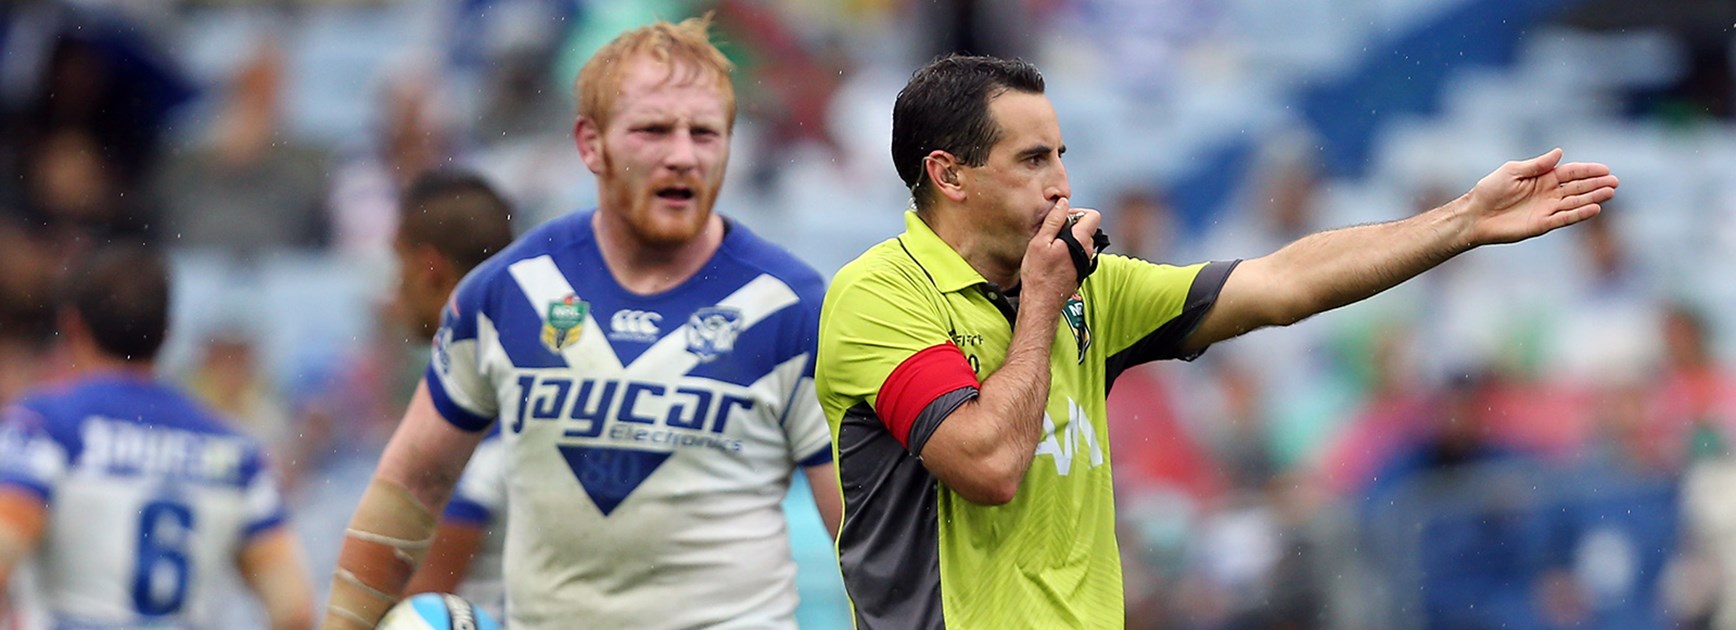 NRL referee Gerard Sutton gives a penalty to South Sydney as Canterbury captain James Graham looks on.